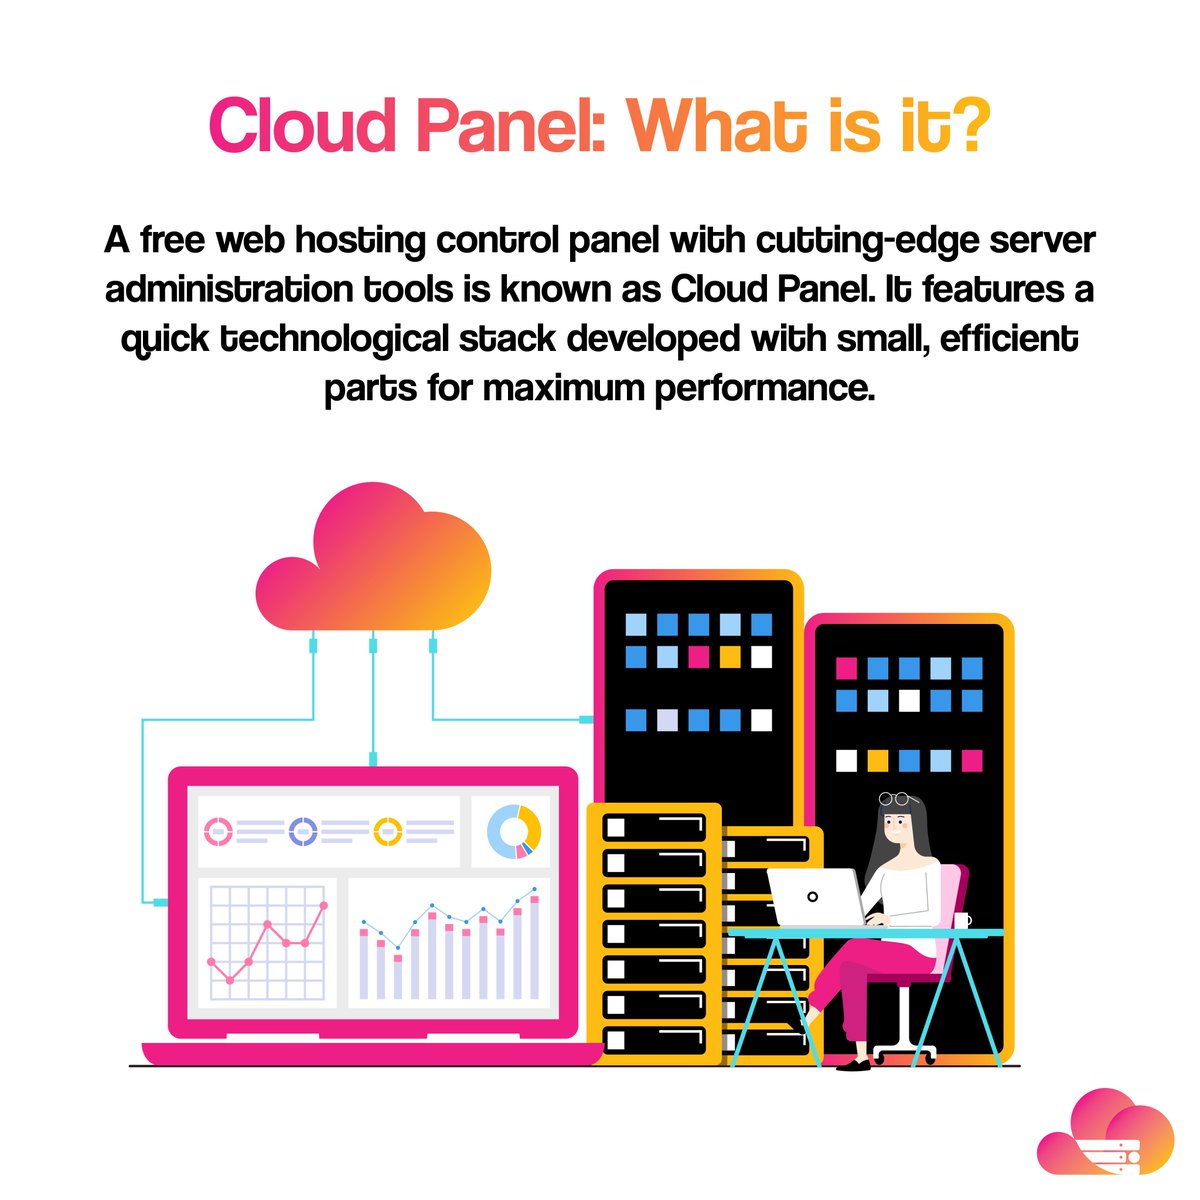 Get ready to elevate your cloud experience! 
Introducing Cloud Panel - your one-stop hub for managing all your cloud services seamlessly.

#cloudpanel #cloudmanagement #tweet #seamlessexperience #cloudserver #CloudHosting